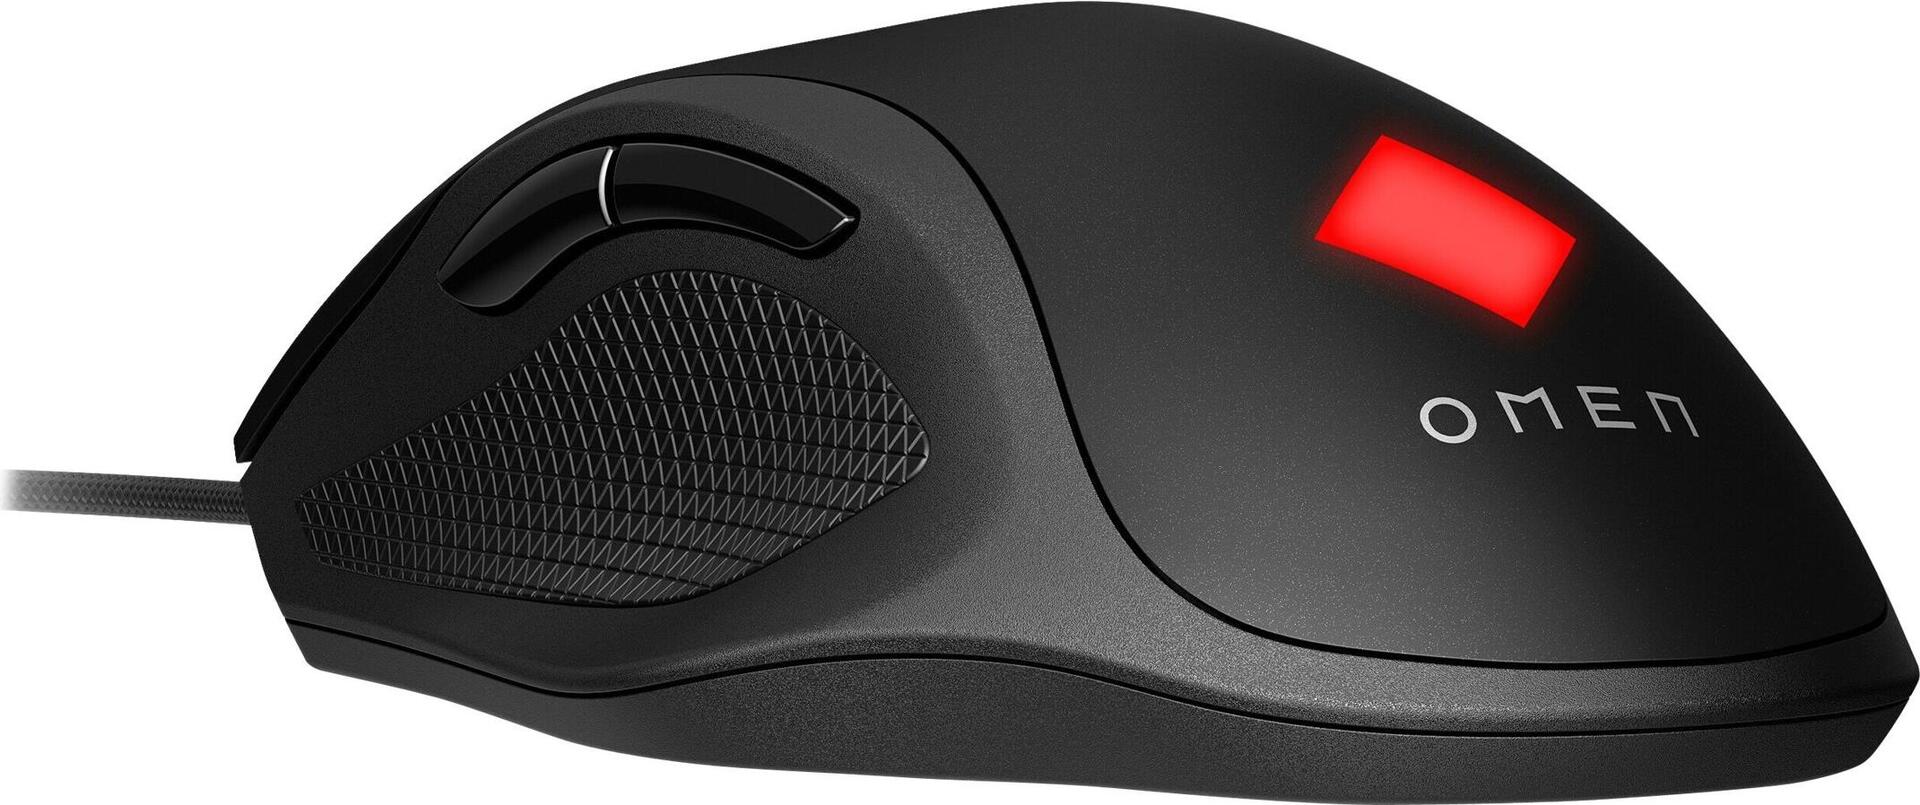 HP Inc. OMEN VECTOR MOUSE . IN (8BC53AA#ABB)